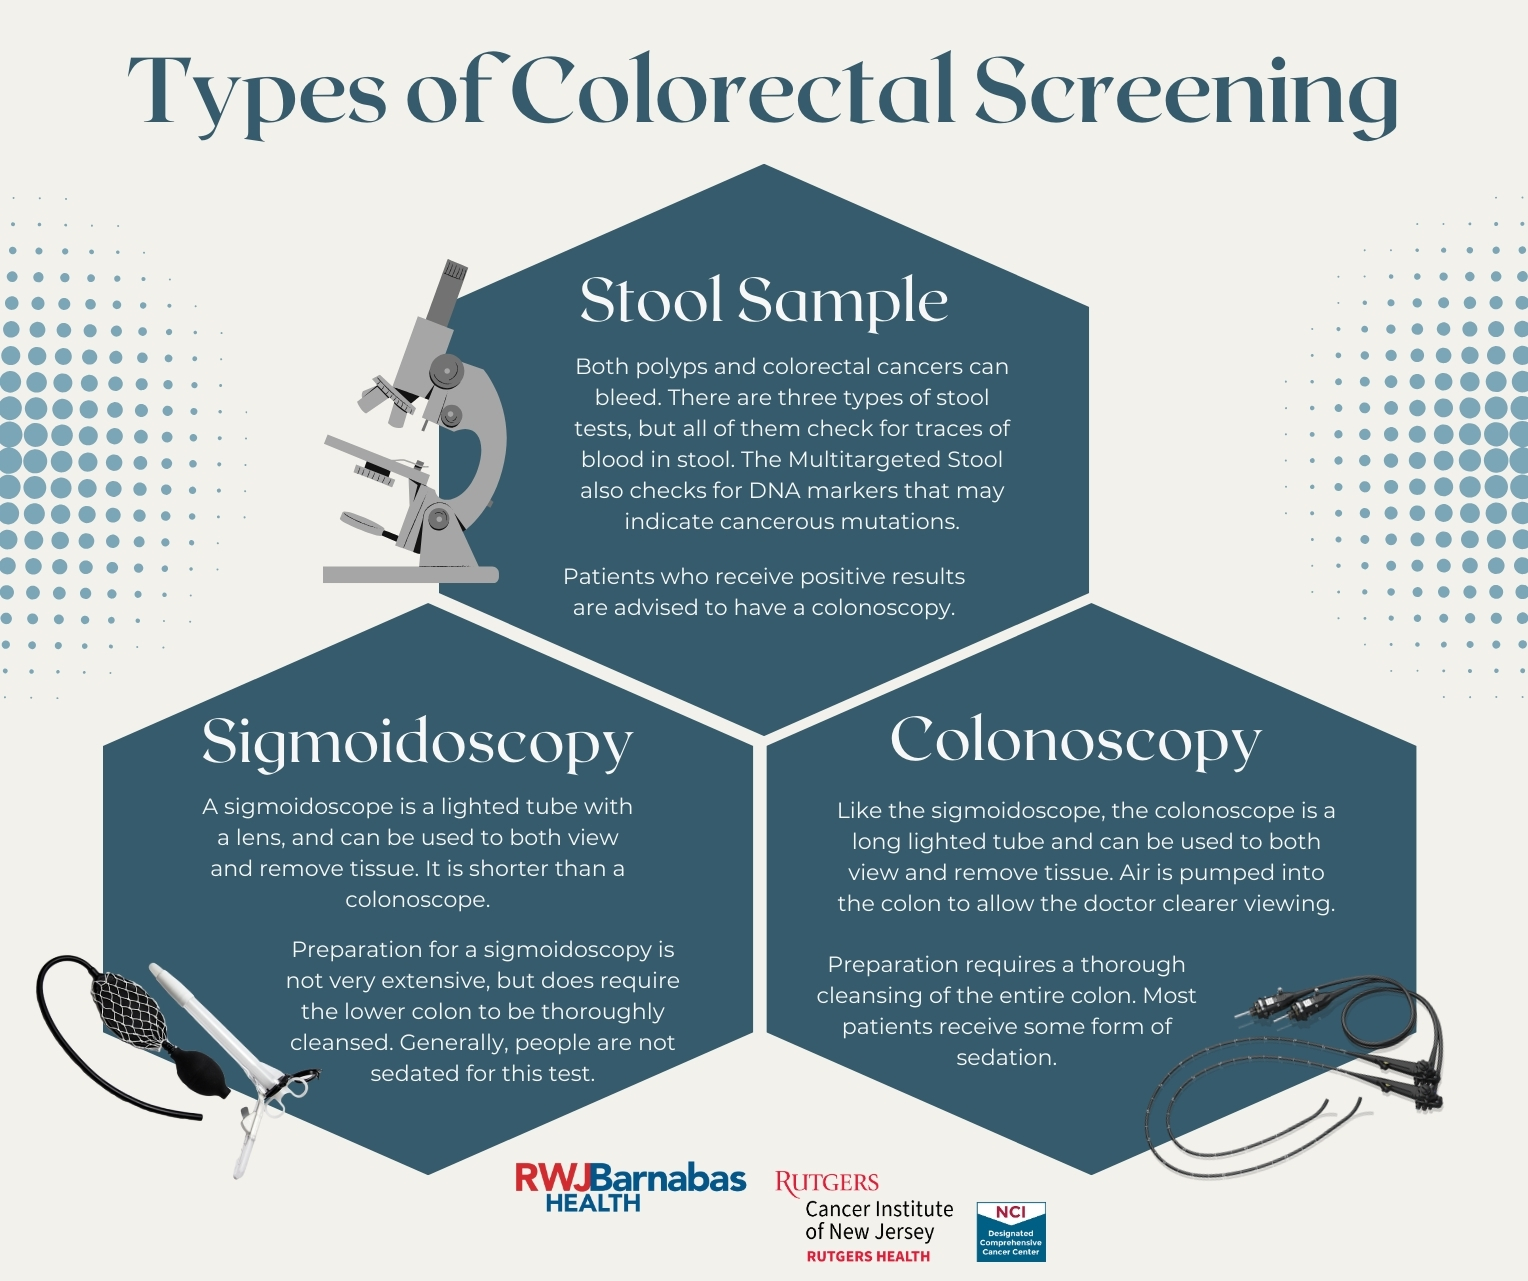 Infographic explaining below information on types of colorectal cancer screenings